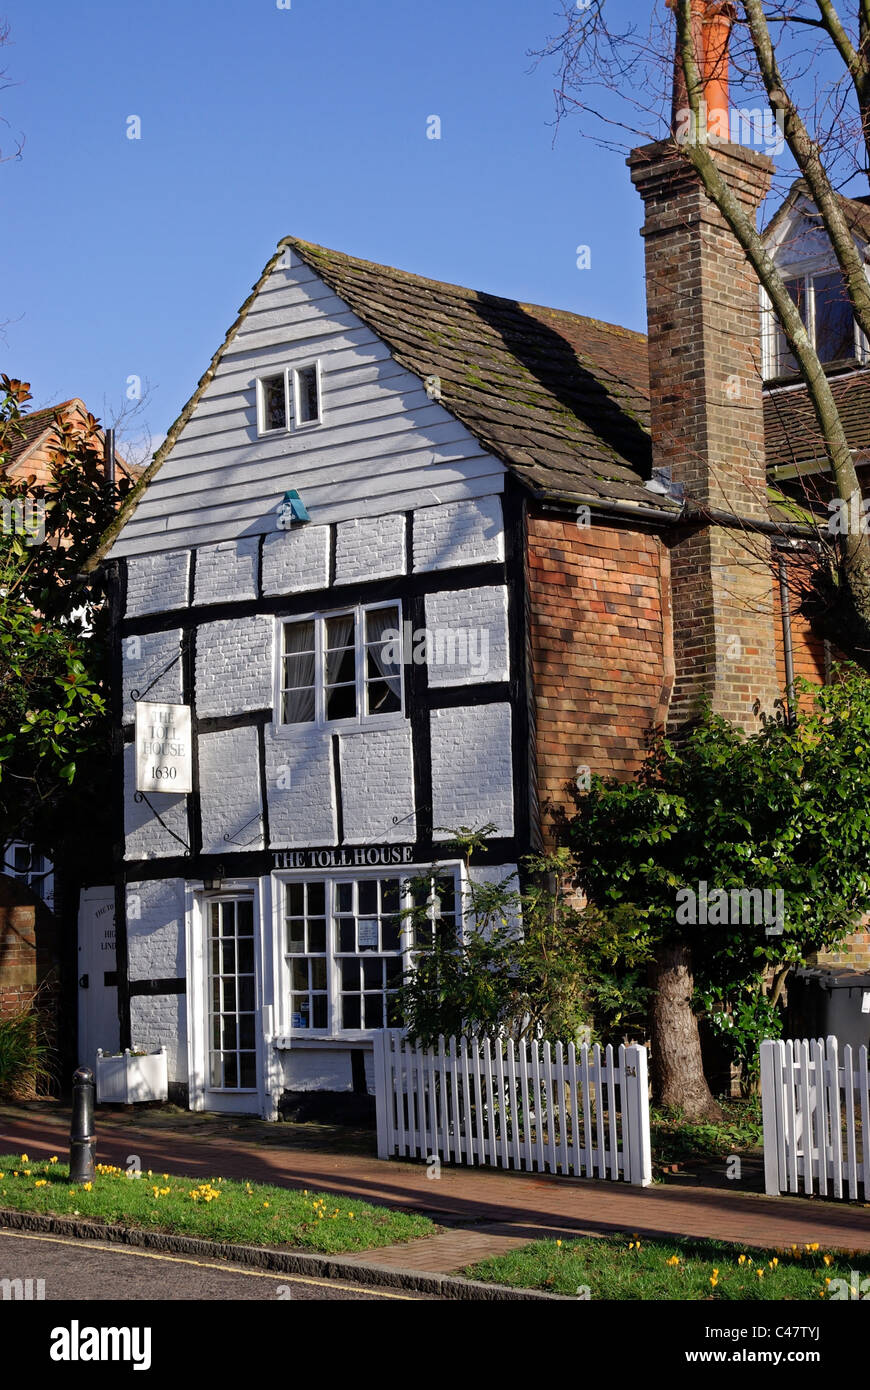 The Old Tollhouse c1630 High Street, Lindfield, West Sussex, England Stock Photo